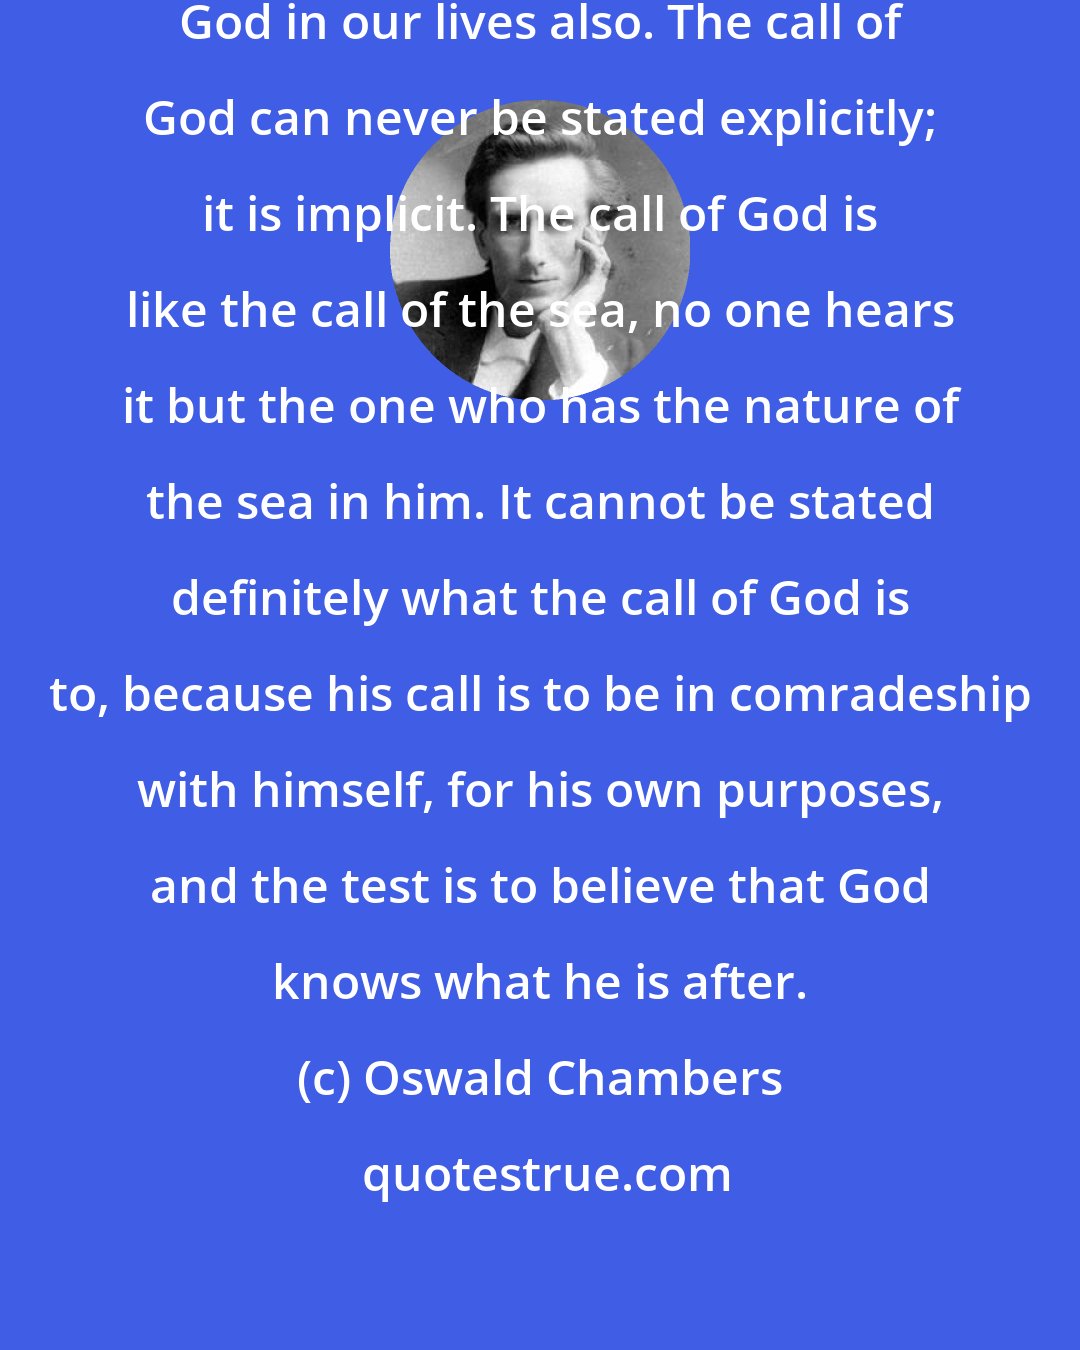 Oswald Chambers: There comes the baffling call of God in our lives also. The call of God can never be stated explicitly; it is implicit. The call of God is like the call of the sea, no one hears it but the one who has the nature of the sea in him. It cannot be stated definitely what the call of God is to, because his call is to be in comradeship with himself, for his own purposes, and the test is to believe that God knows what he is after.